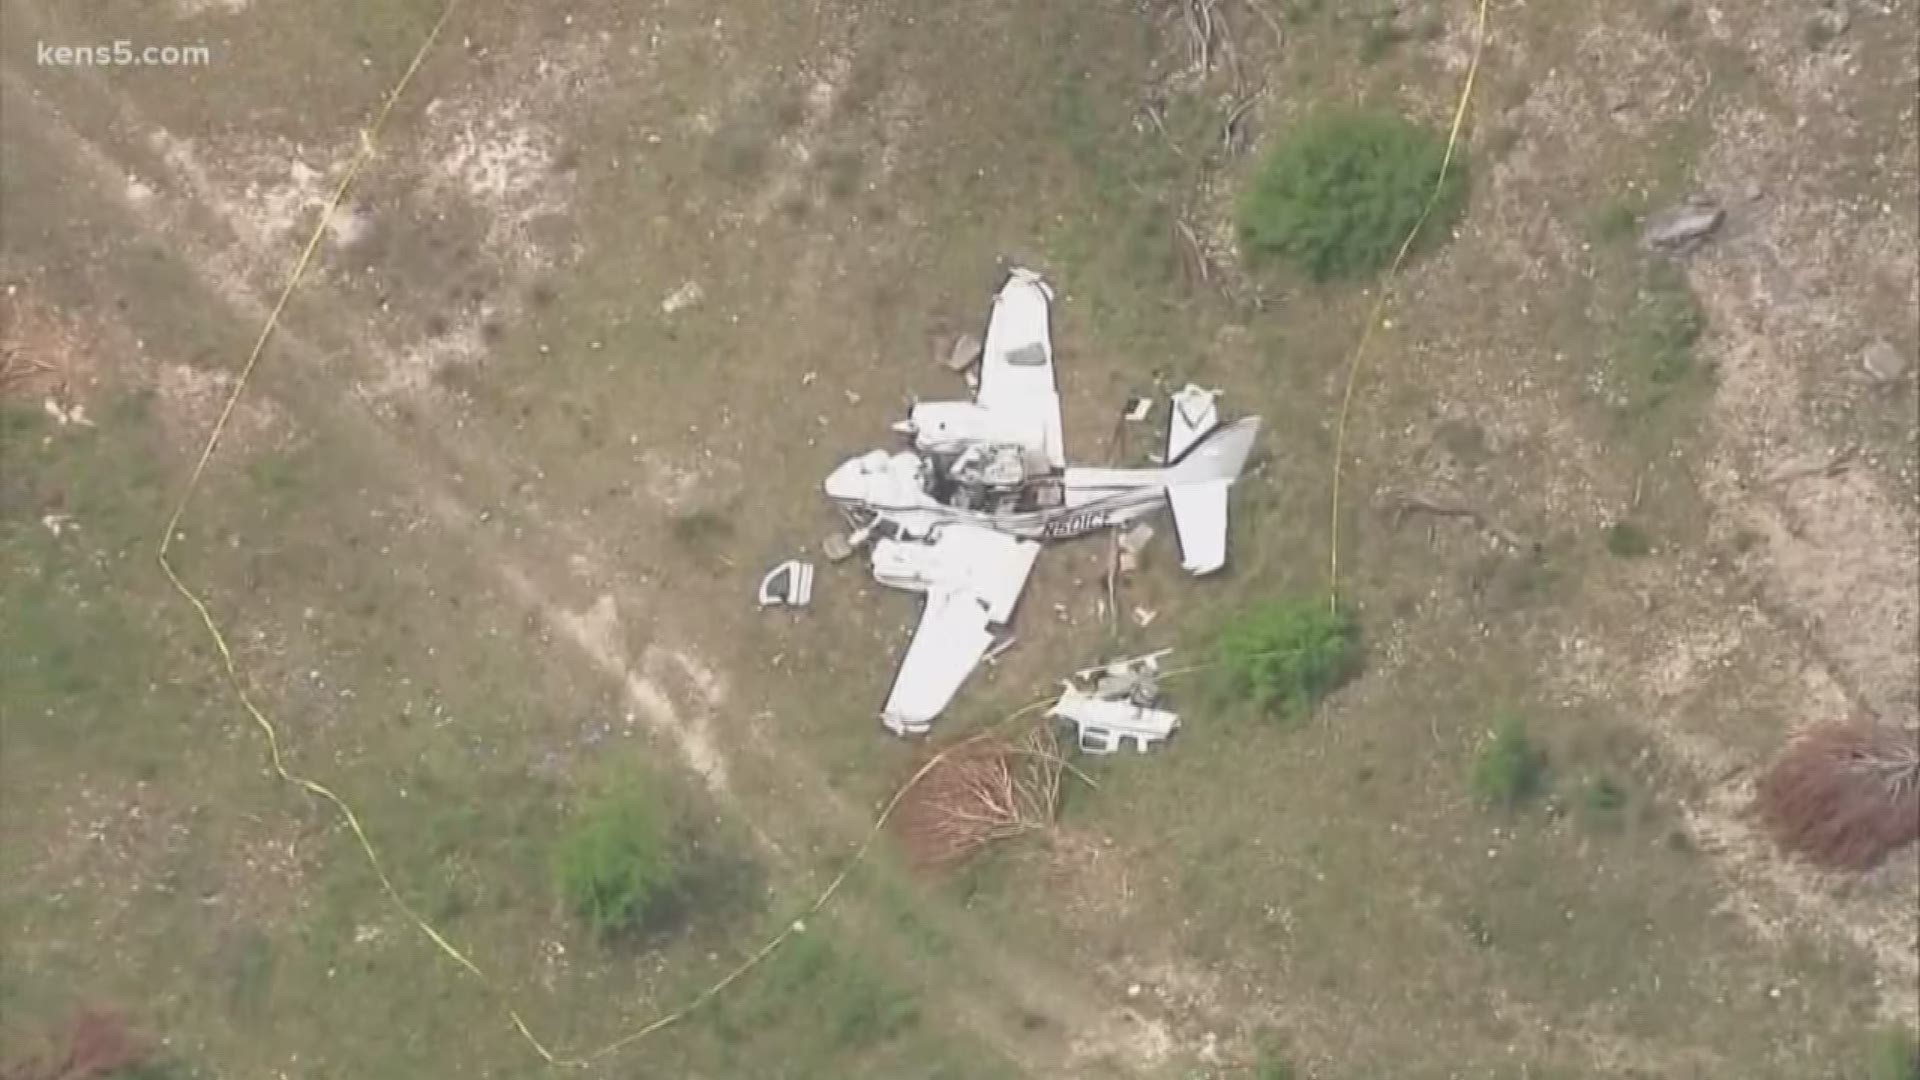 Six people have been killed in a plane crash in Kerrville Monday, the Texas Department of Public Safety has confirmed to KENS 5. Kurt Leslie has nearly 40 years of experience in aeronautics. The current Dean for the College of Aeronatics at Hallmark University said investigators want to make sure they get it right.